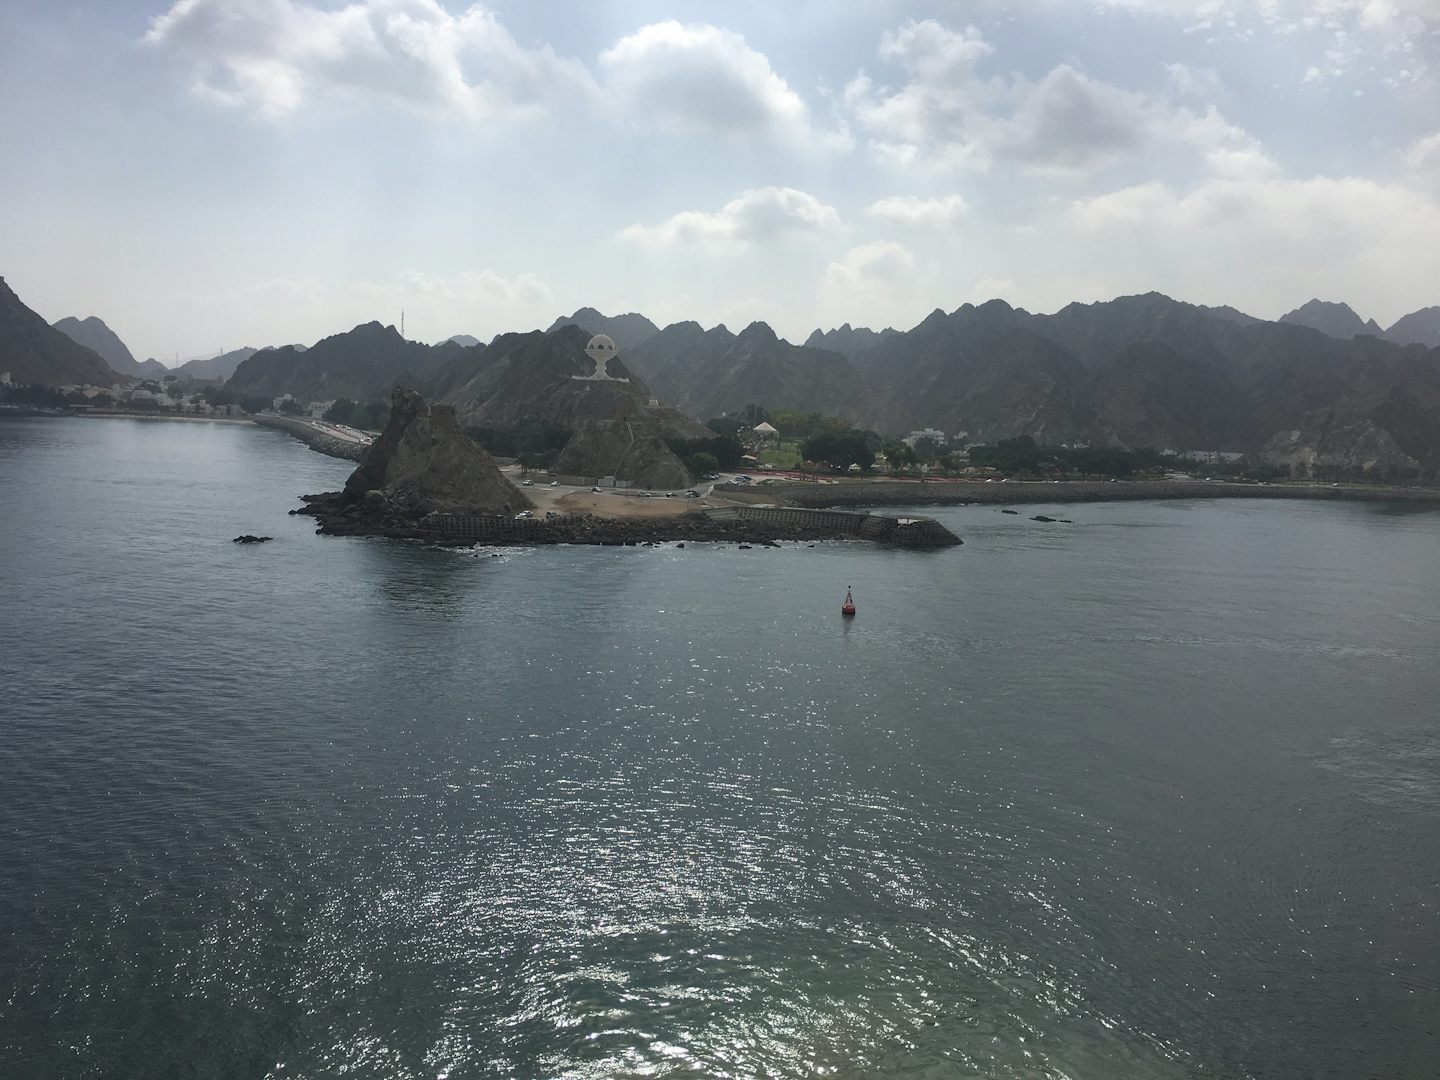 Sailing into our first port of call , which was Muscat , perfect weather all the way through the cruise , loved everything about it . Will defiantly be returning on celebrity again !!!!